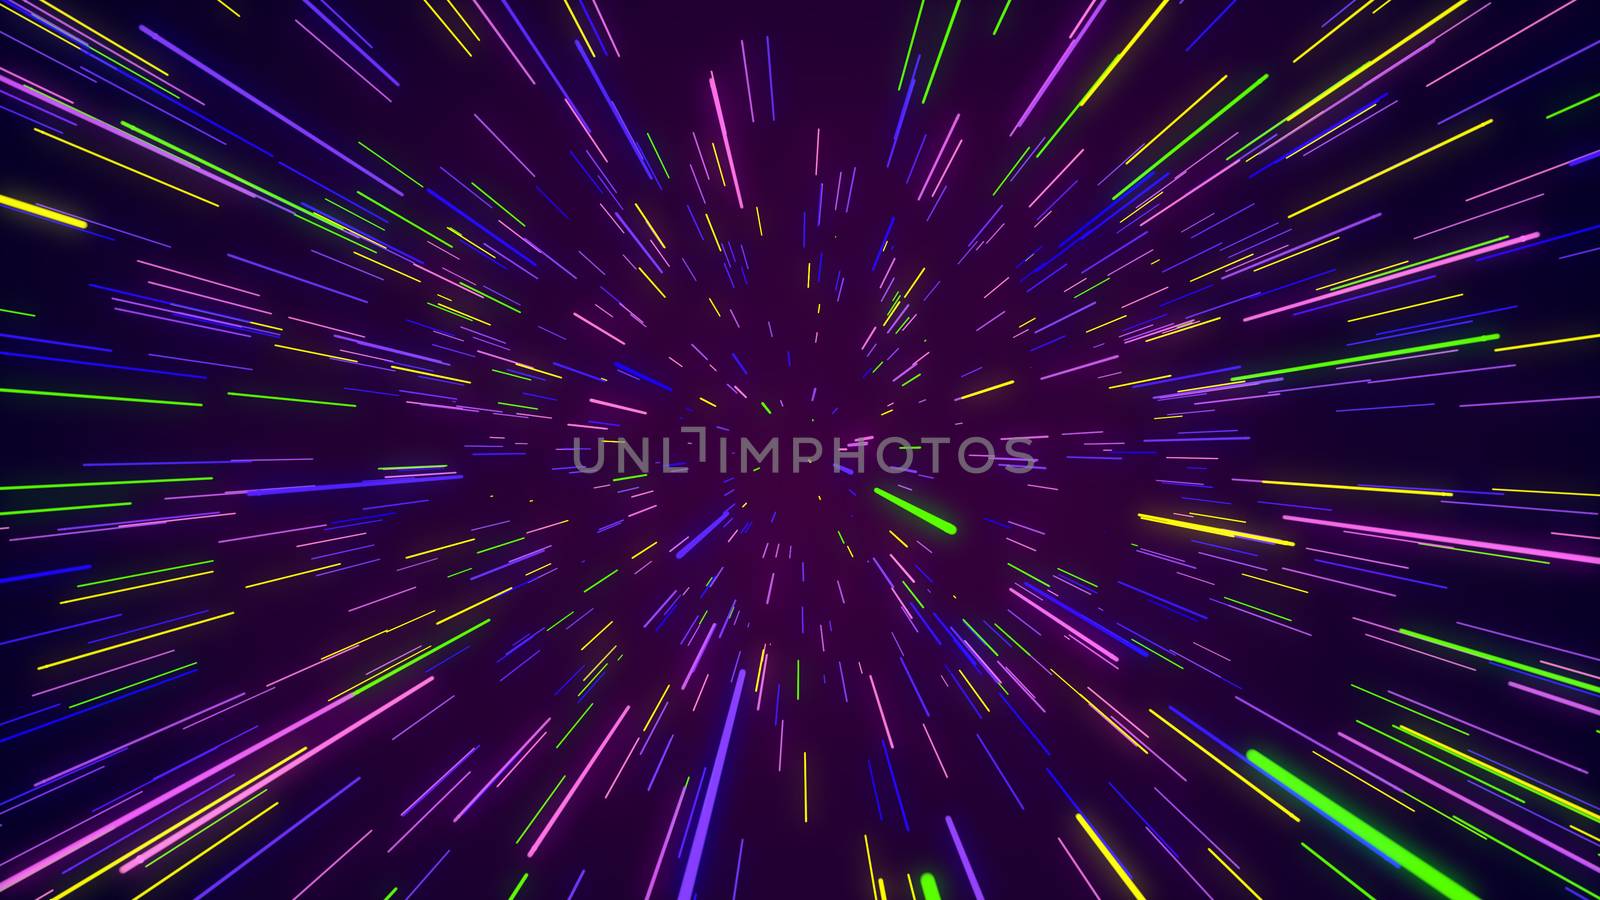 Wonderful 3d illustration of a colorful space portal from straight lines looking like sun rays sparkling cheerfully in the violet background